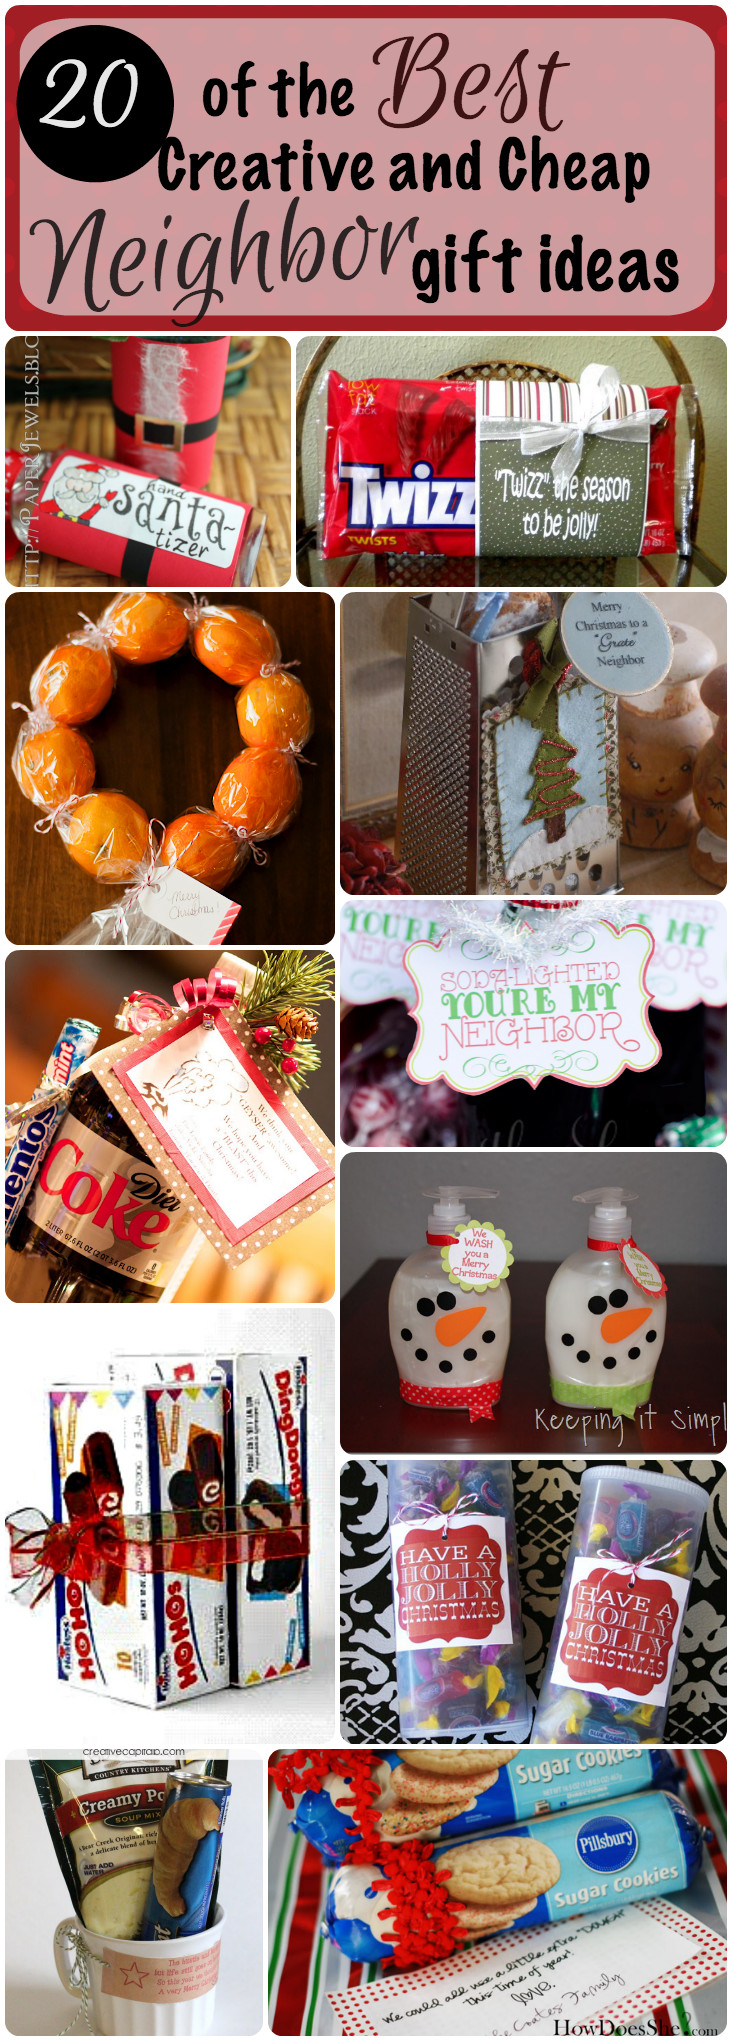 Christmas Gift Ideas On A Budget
 20 of the Best Creative and Cheap Neighbor Gifts for Christmas